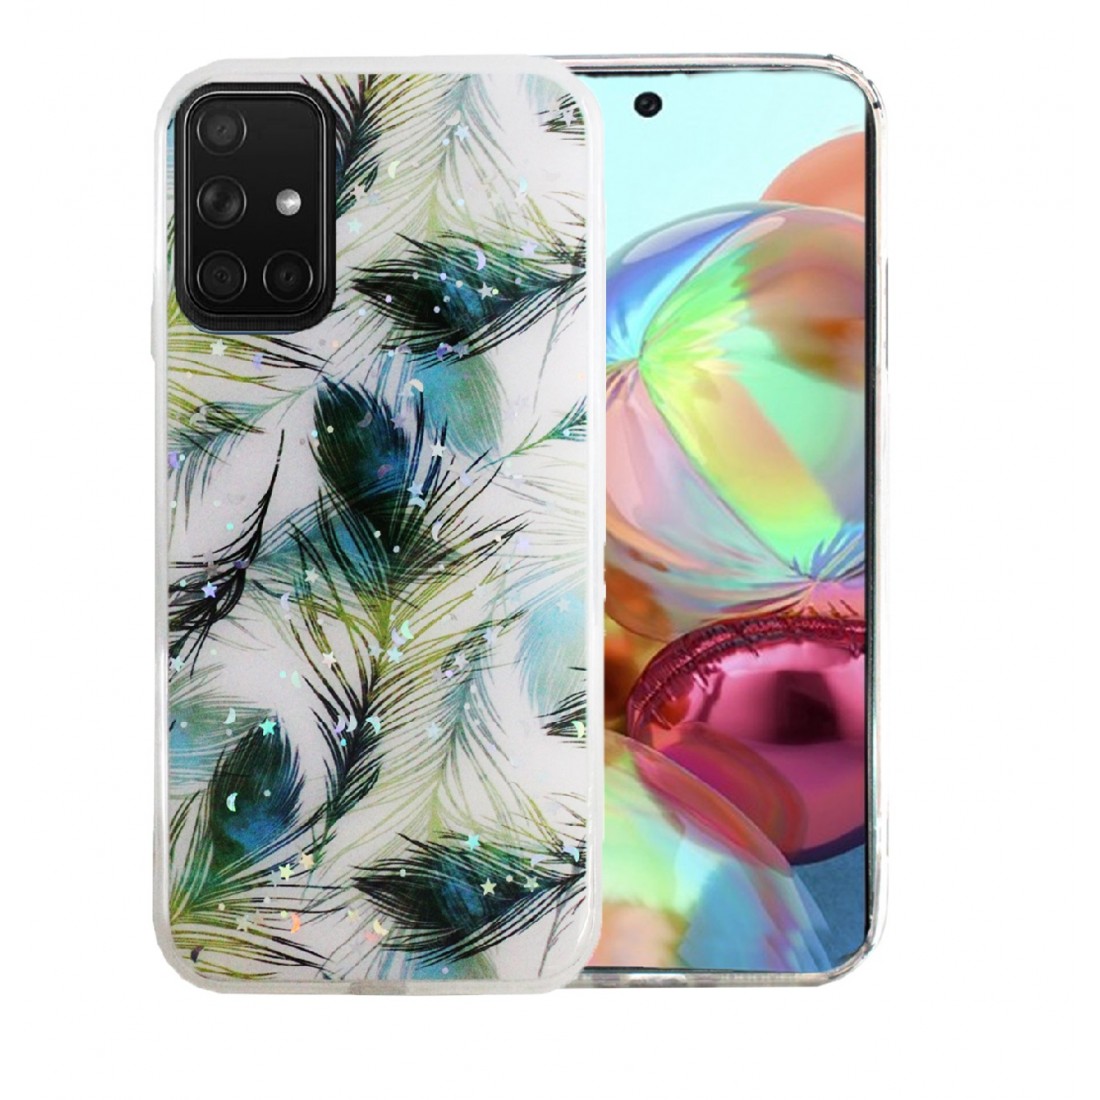 Samsung Galaxy A51 silicone 3 Back cover Telefoonhoesje